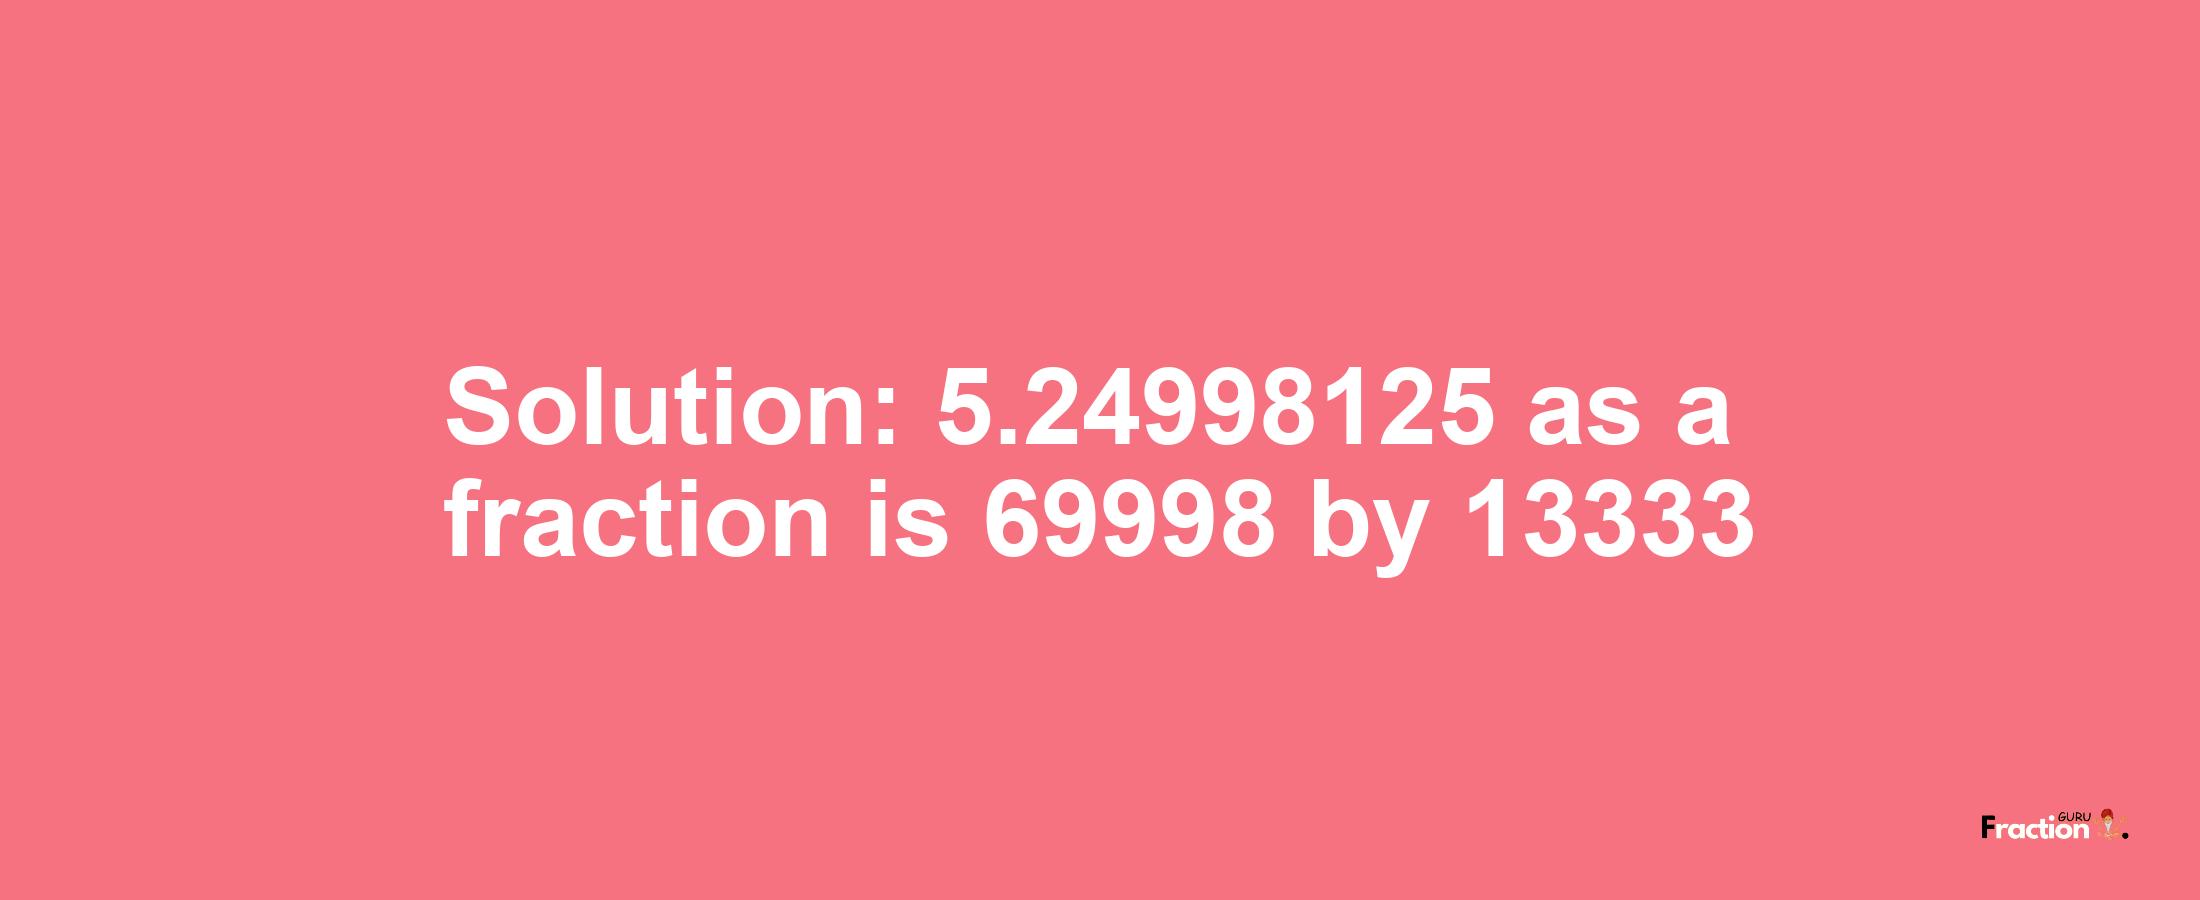 Solution:5.24998125 as a fraction is 69998/13333